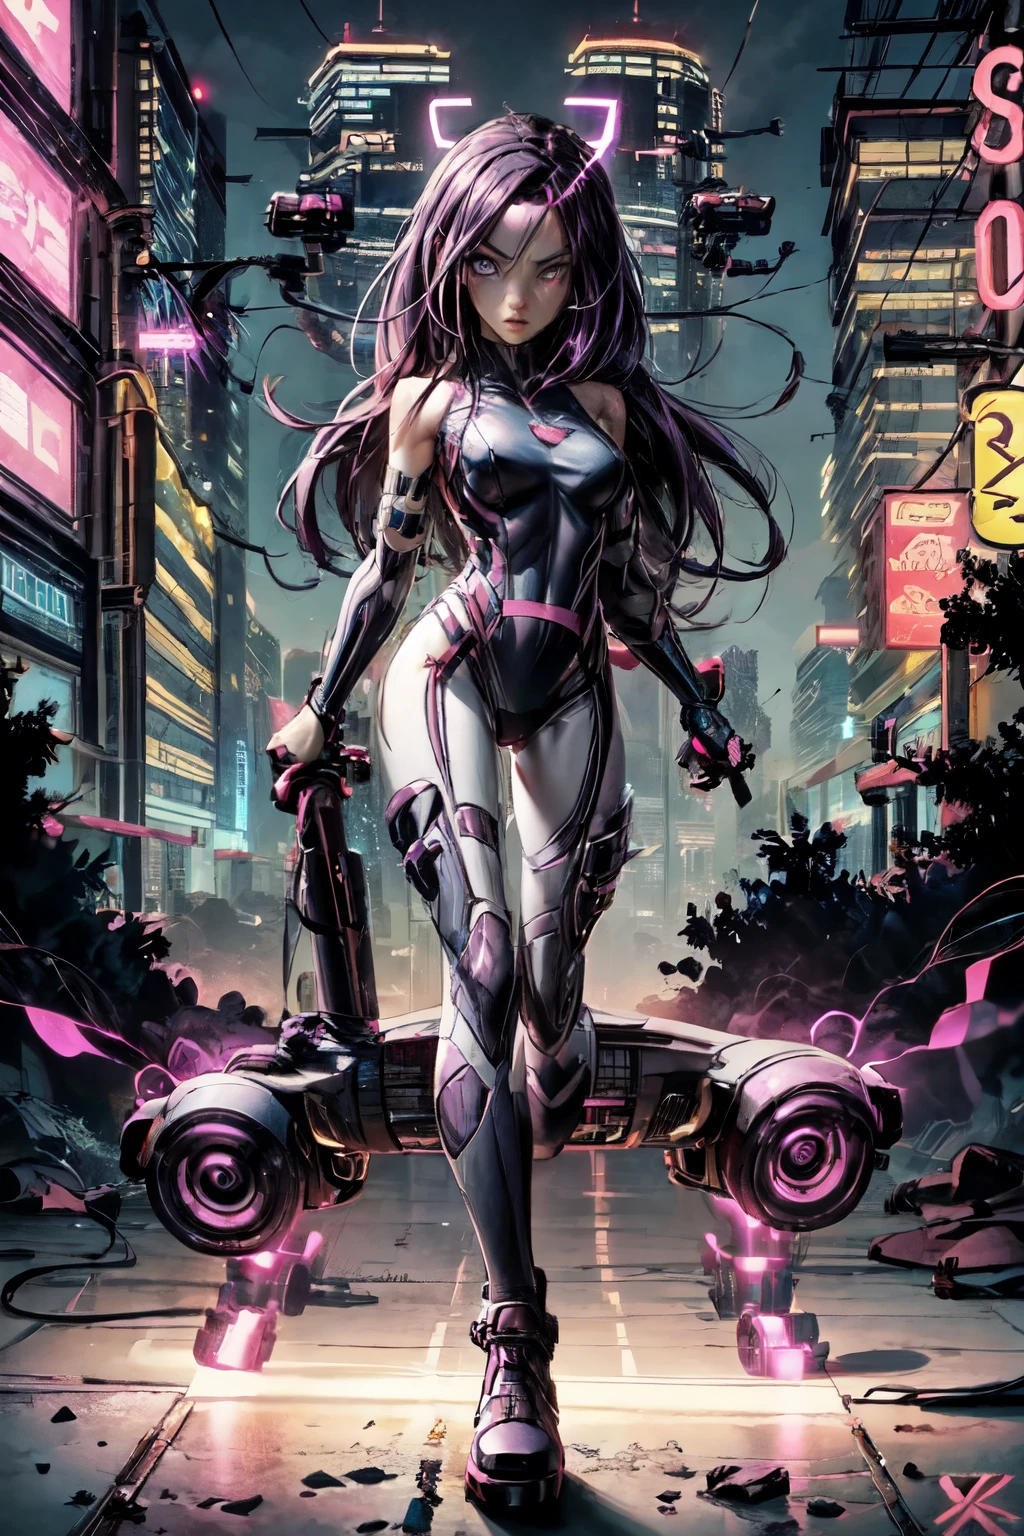 "In a futuristic world, Psylocke zoomed through the sky on her hoverboard, her mind controlling the speed and direction as she explored the neon-lit cityscape."

